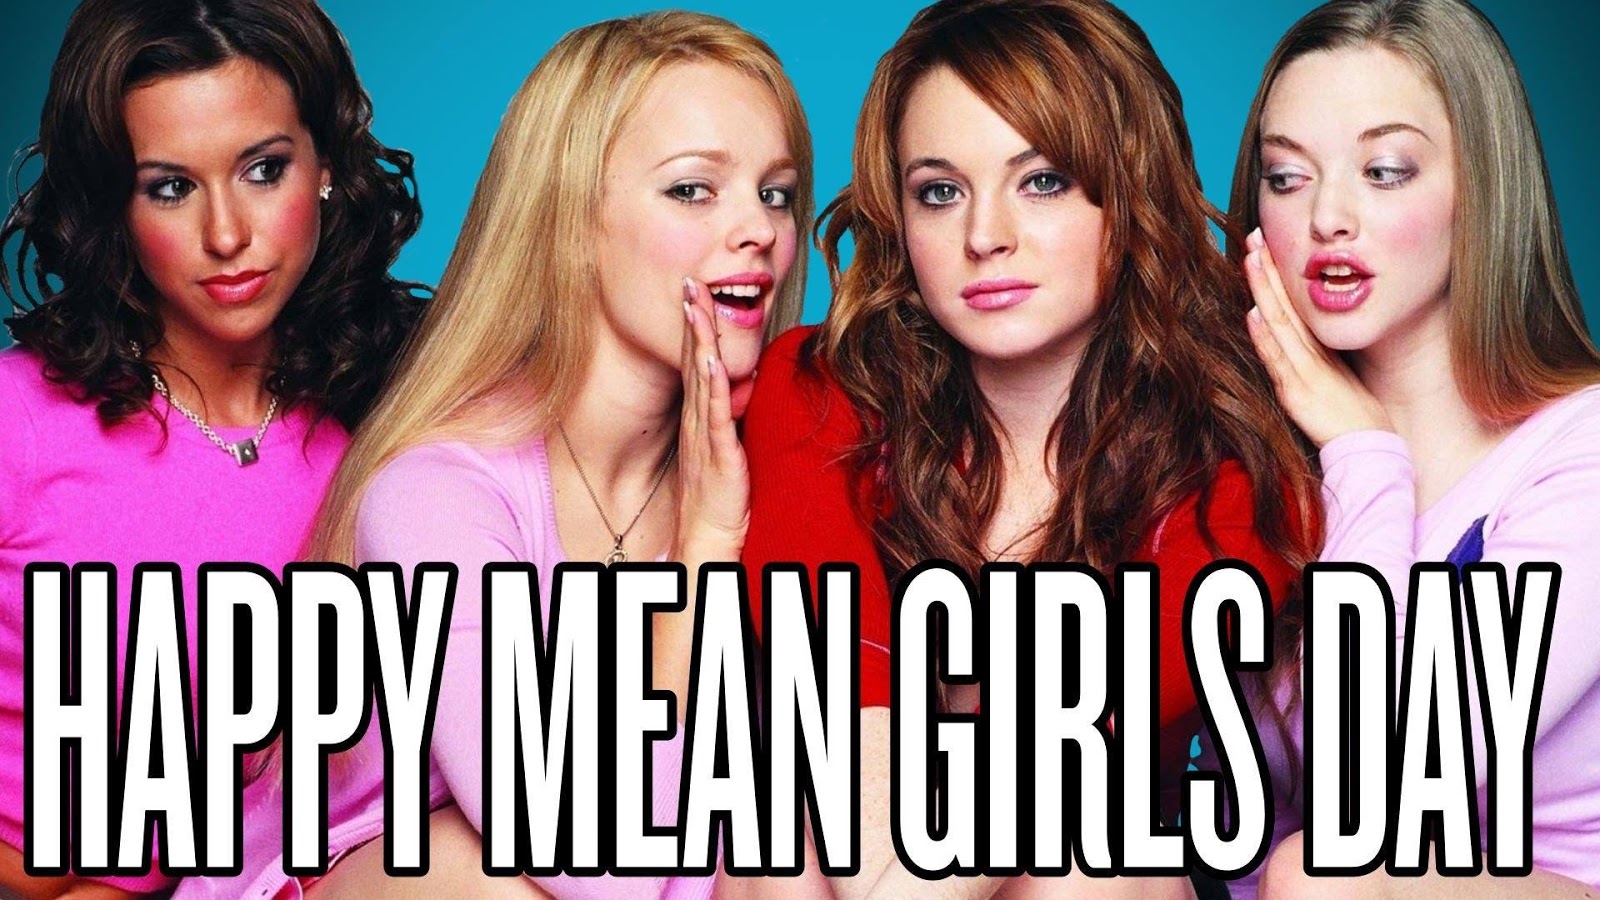 Mean Girls Day Wishes for Whatsapp